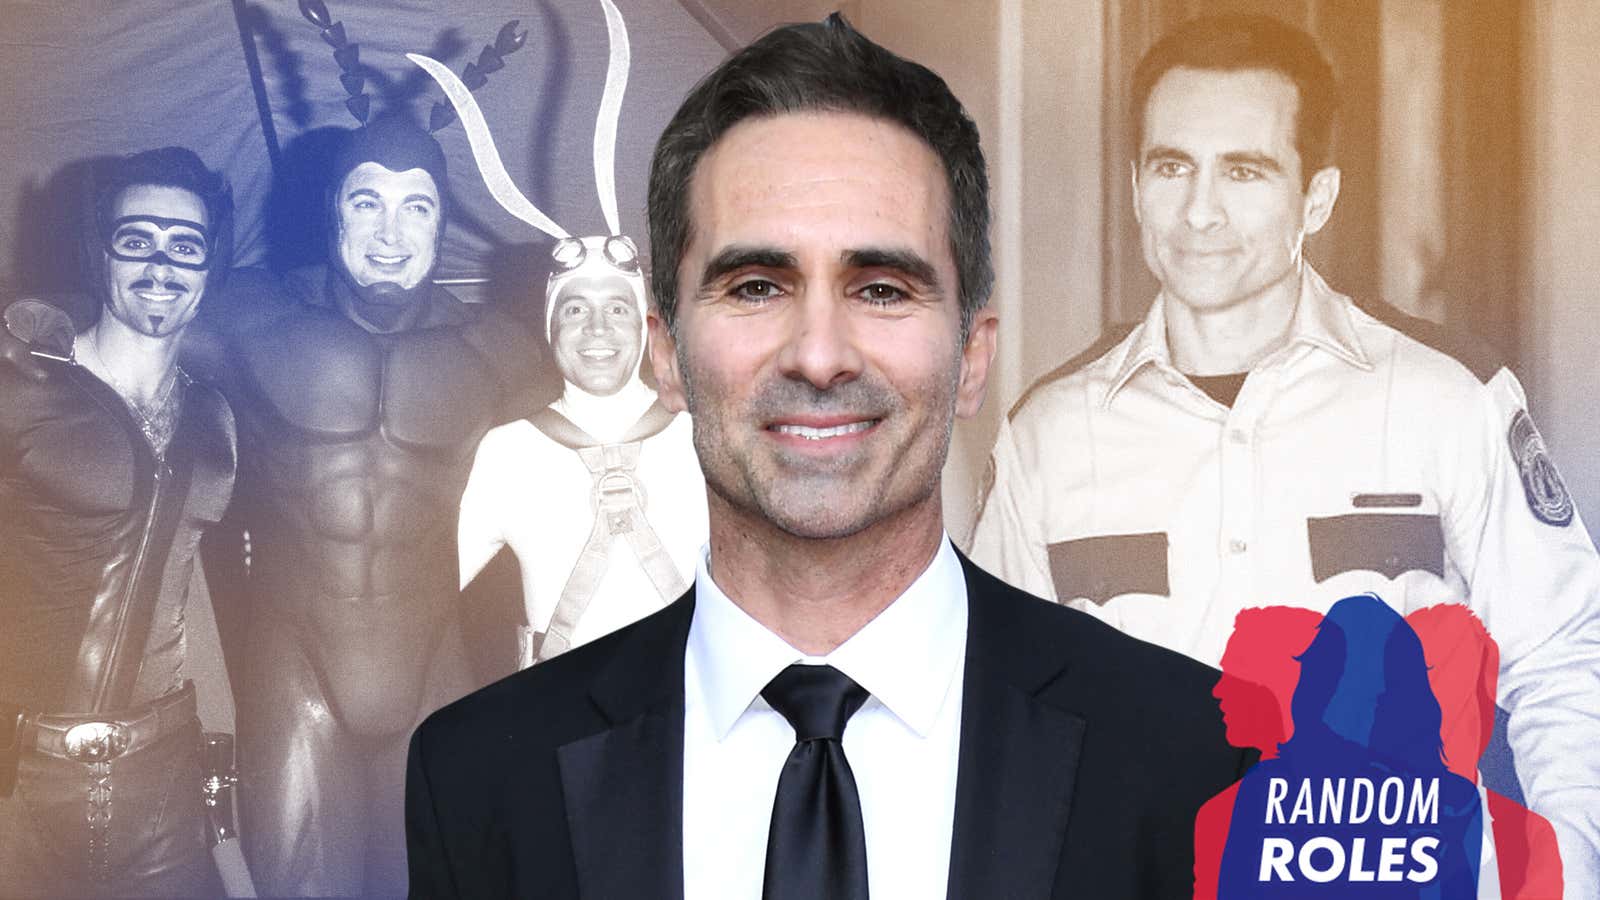 From left: Nestor Carbonell with the cast of The Tick (Photo: Evan Agostini/ImageDirect/Getty Images), at the Golden Globes in 2020 (Photo: Jon Kopaloff/Getty Images), and in Bates Motel (Photo: A+E)